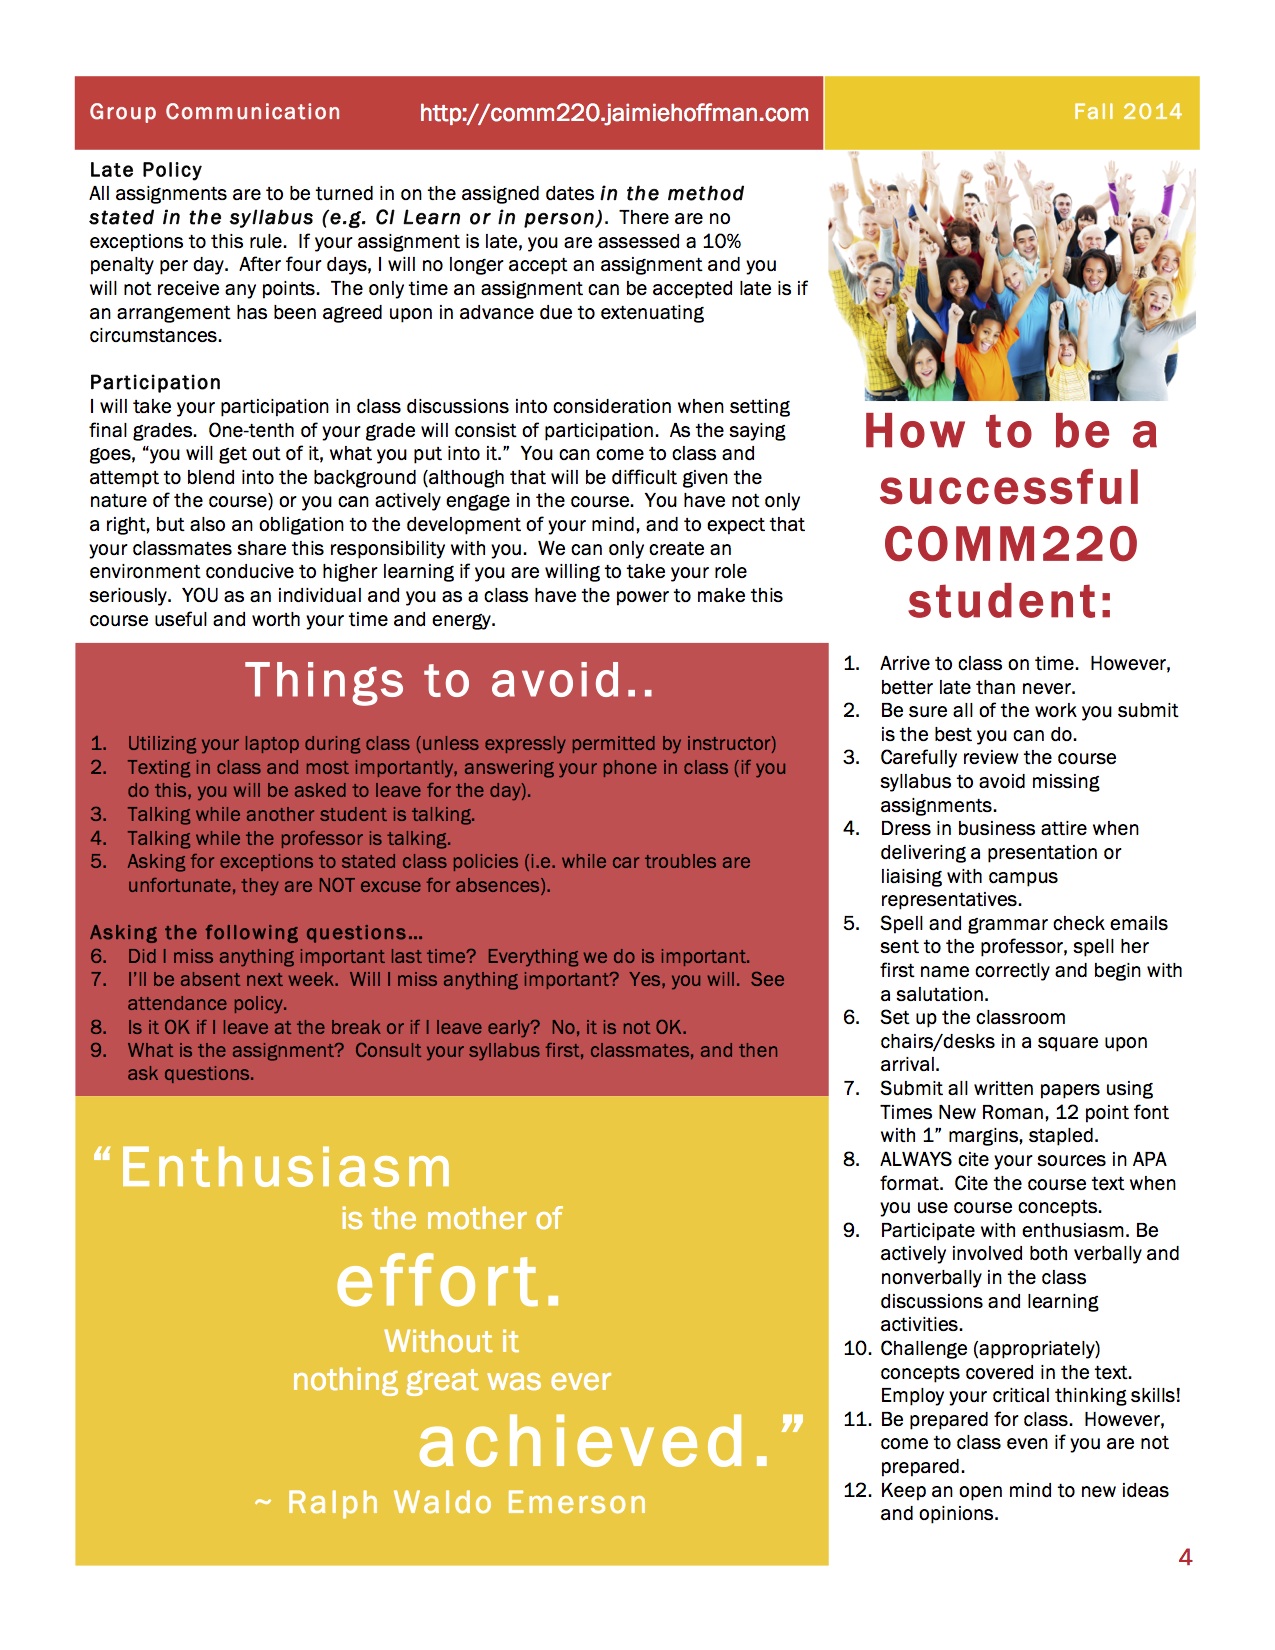 Page 4Design_Course_Syllabus_Hoffman_COMM_220_Fall_2014